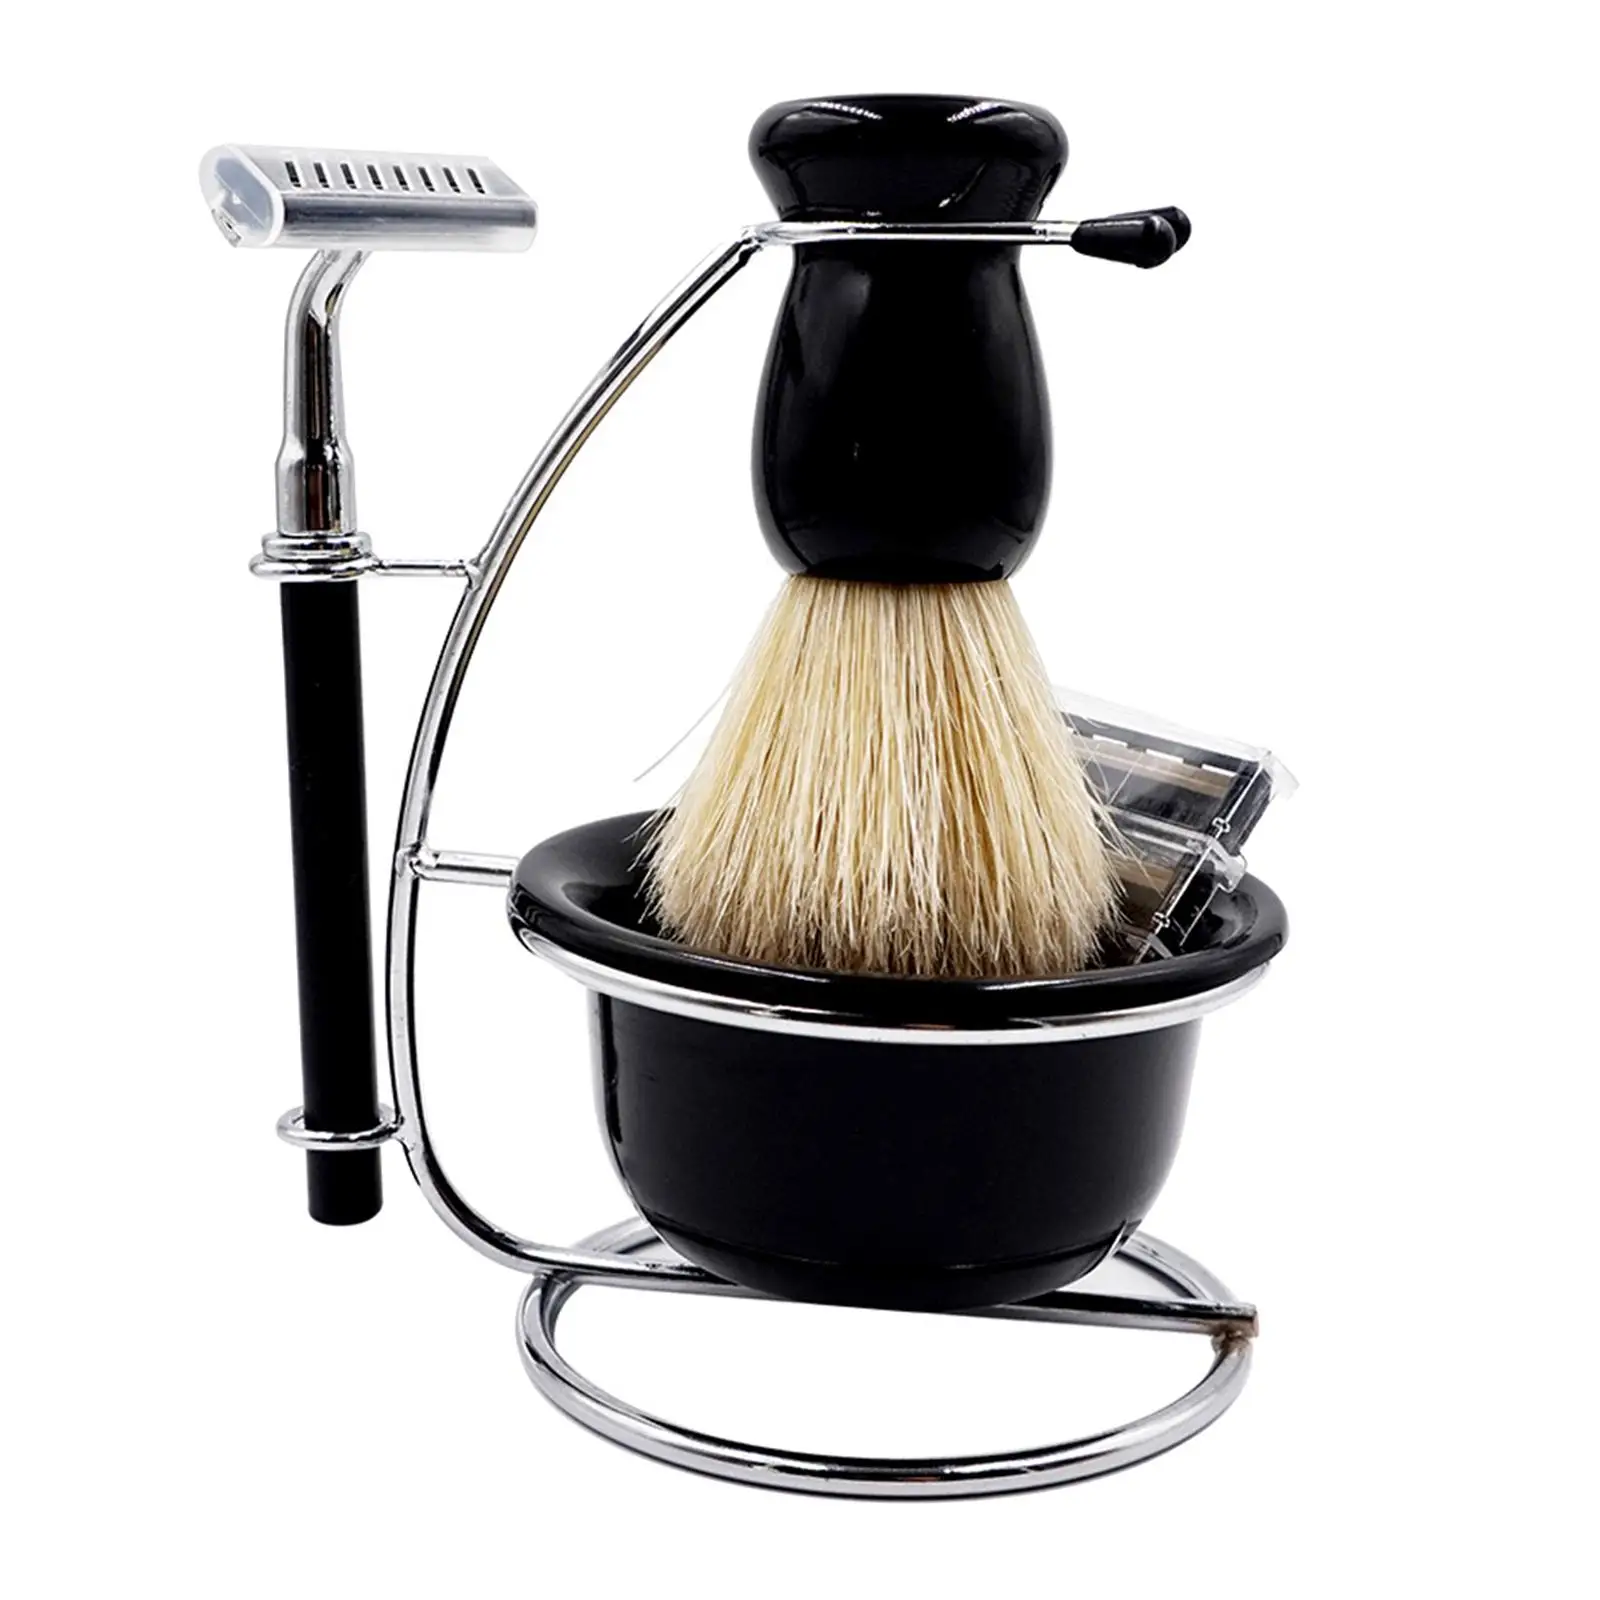 Travel Shaving for Men Manual Stand Brush Bowl Set Accessories Durable Portable Solid Stainess Steel Holder Elegant 